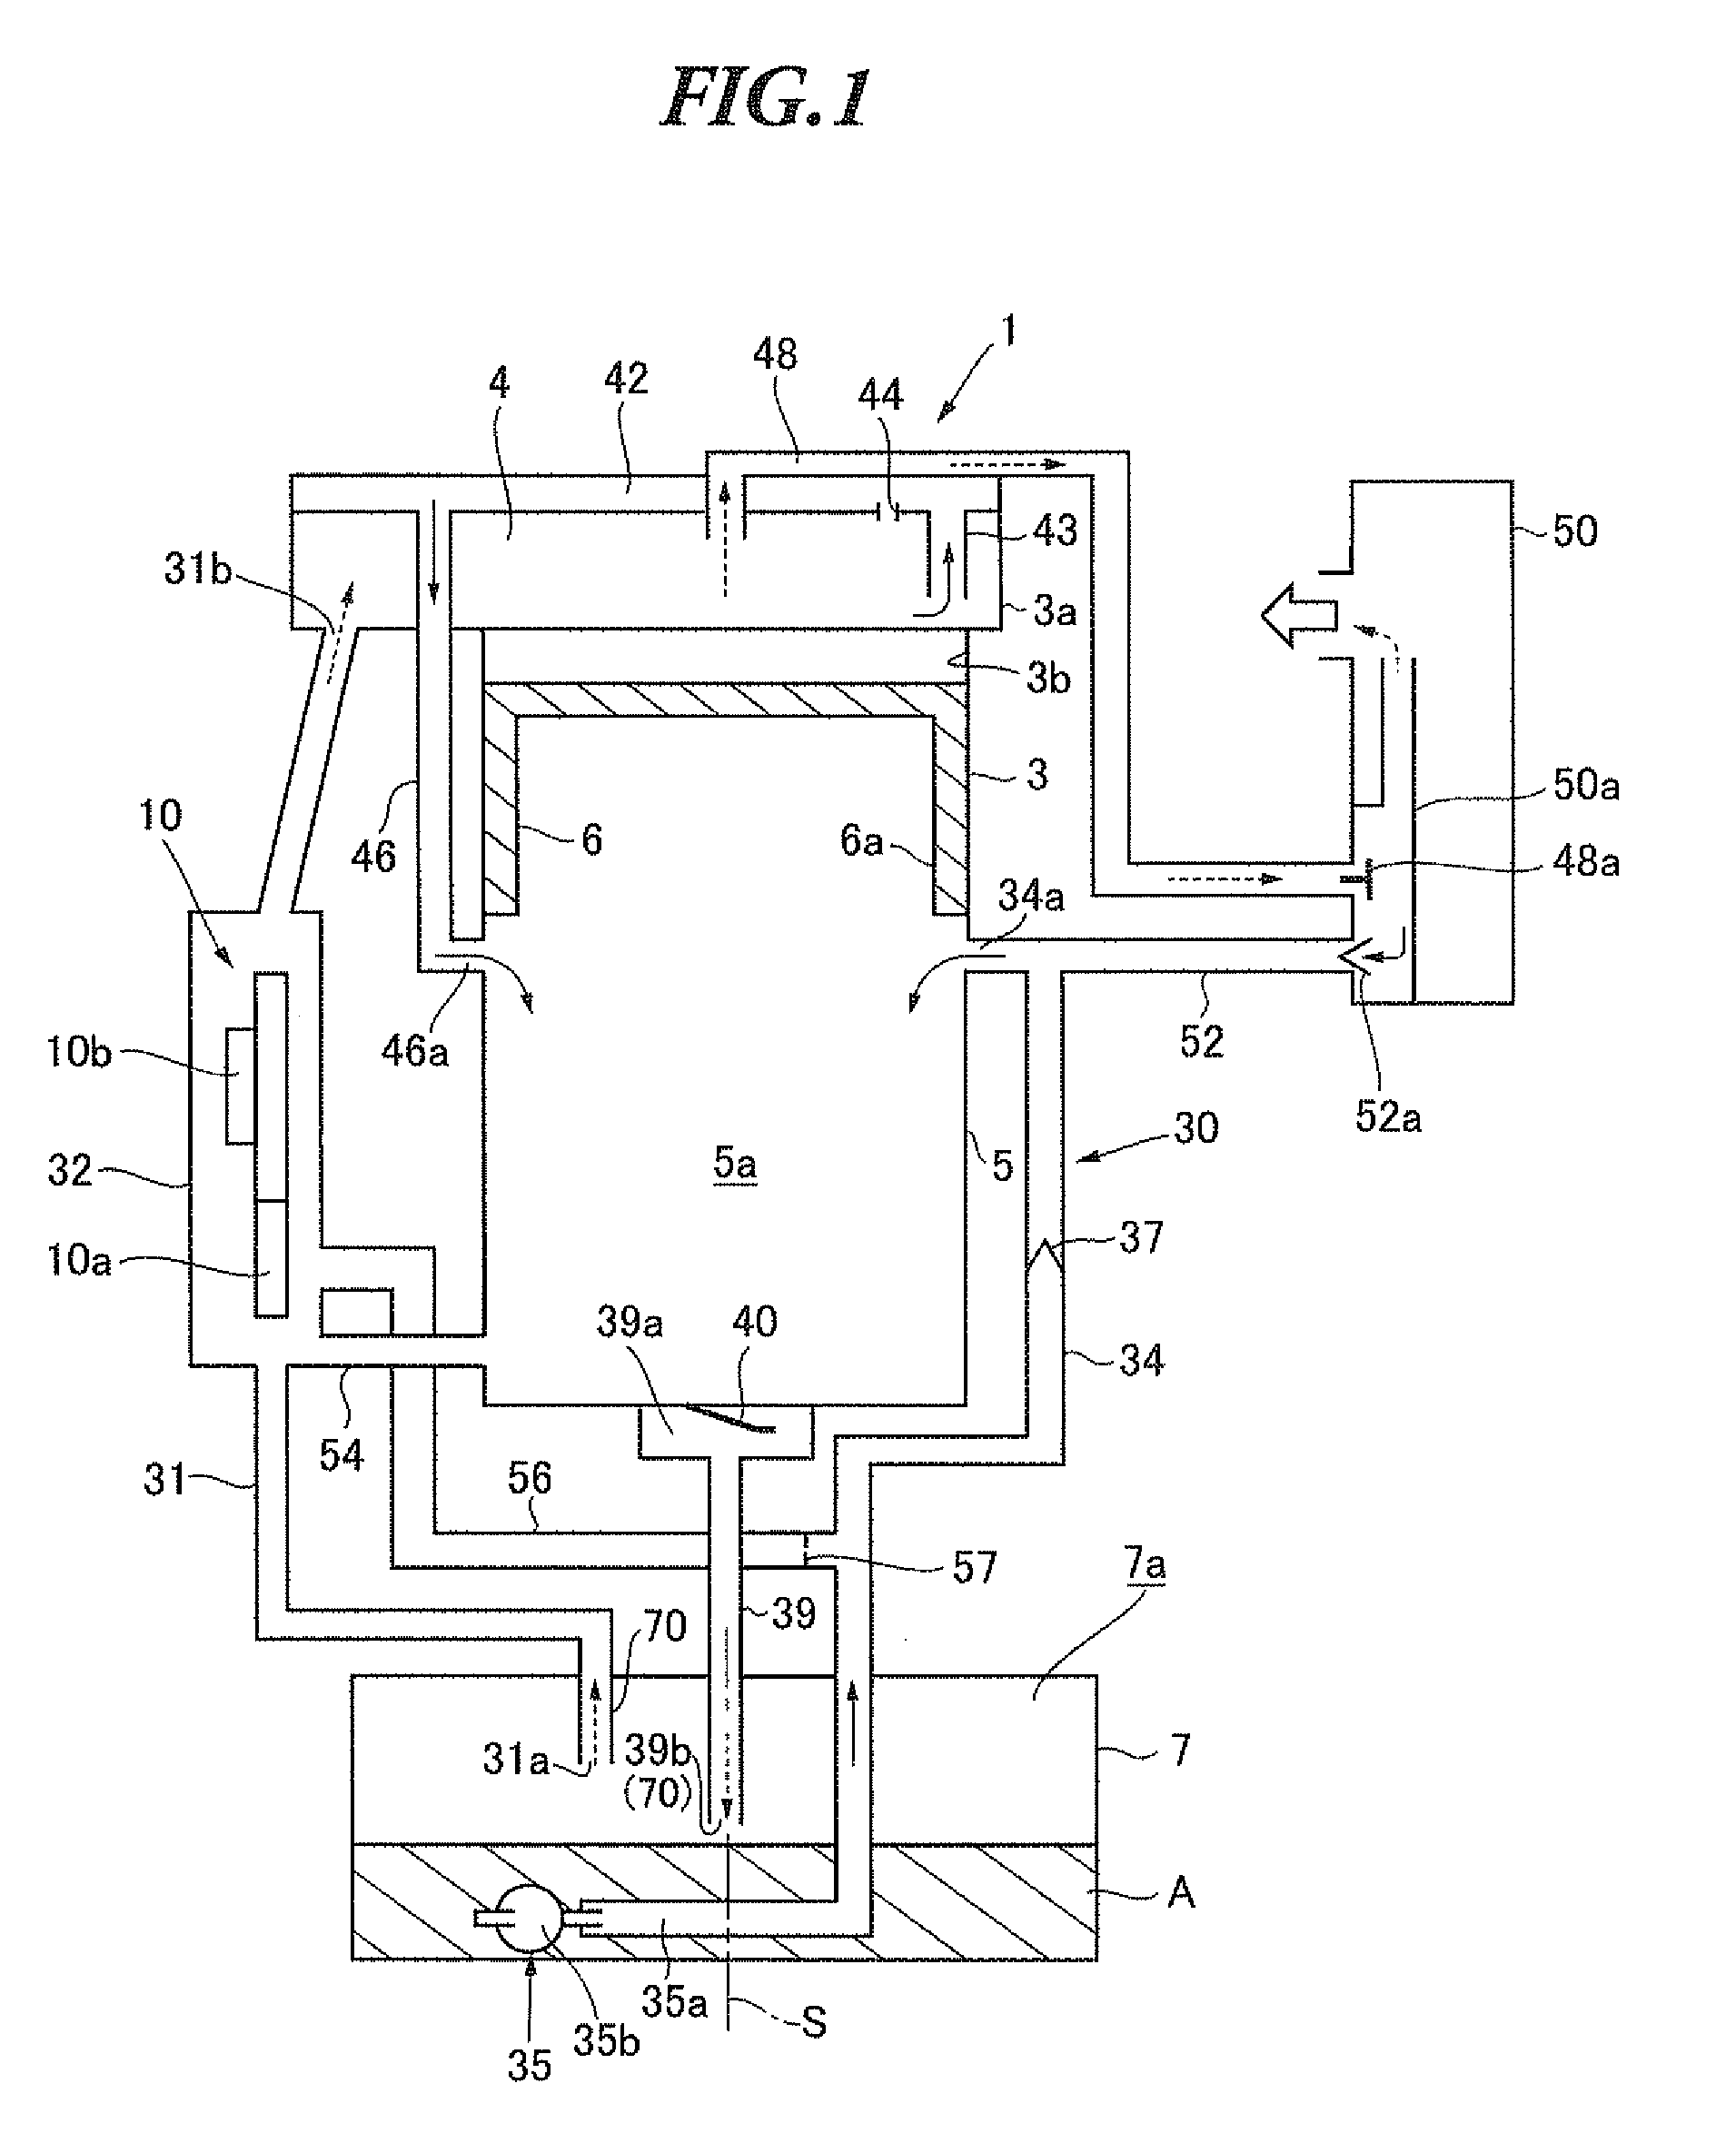 Lubrication system for four-stroke engine